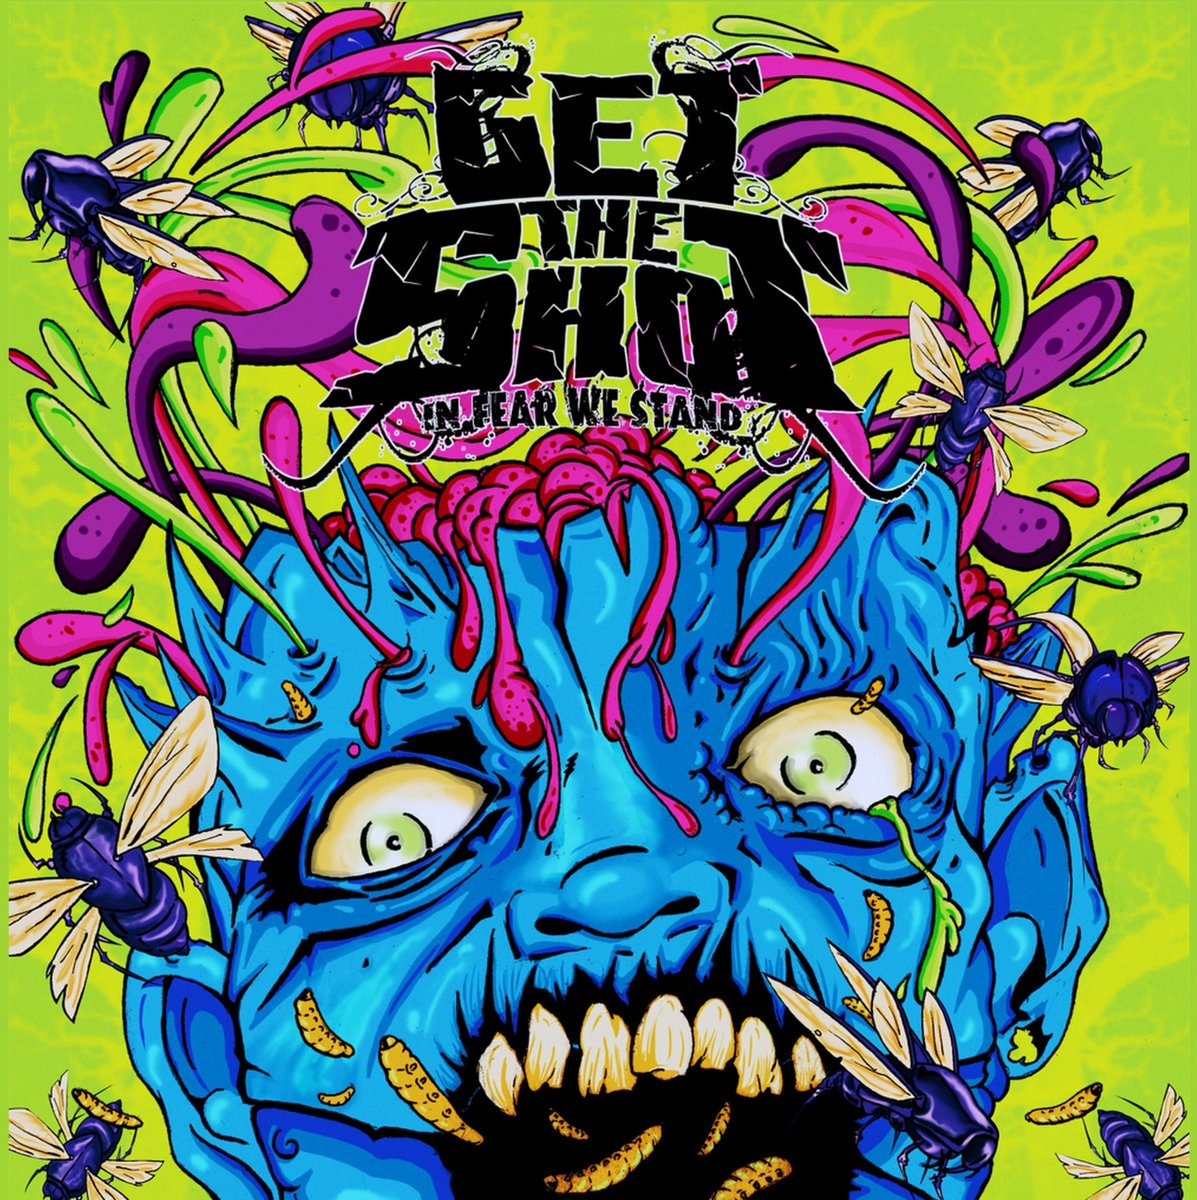 CD Shop - GET THE SHOT IN FEAR WE STAND